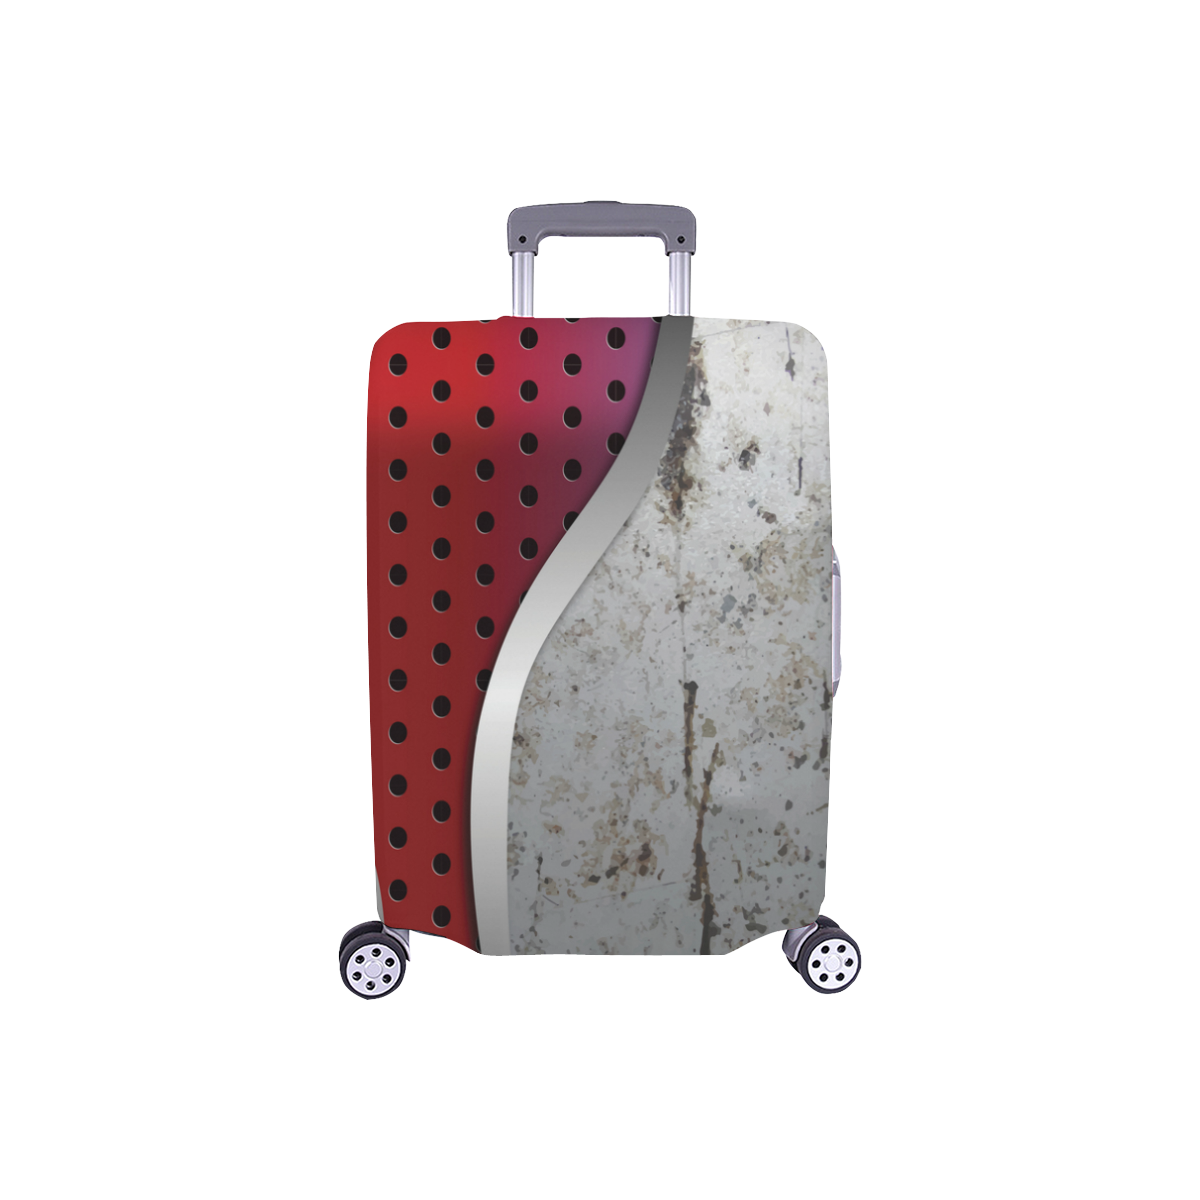 3D metal textured art Luggage Cover/Small 18"-21"